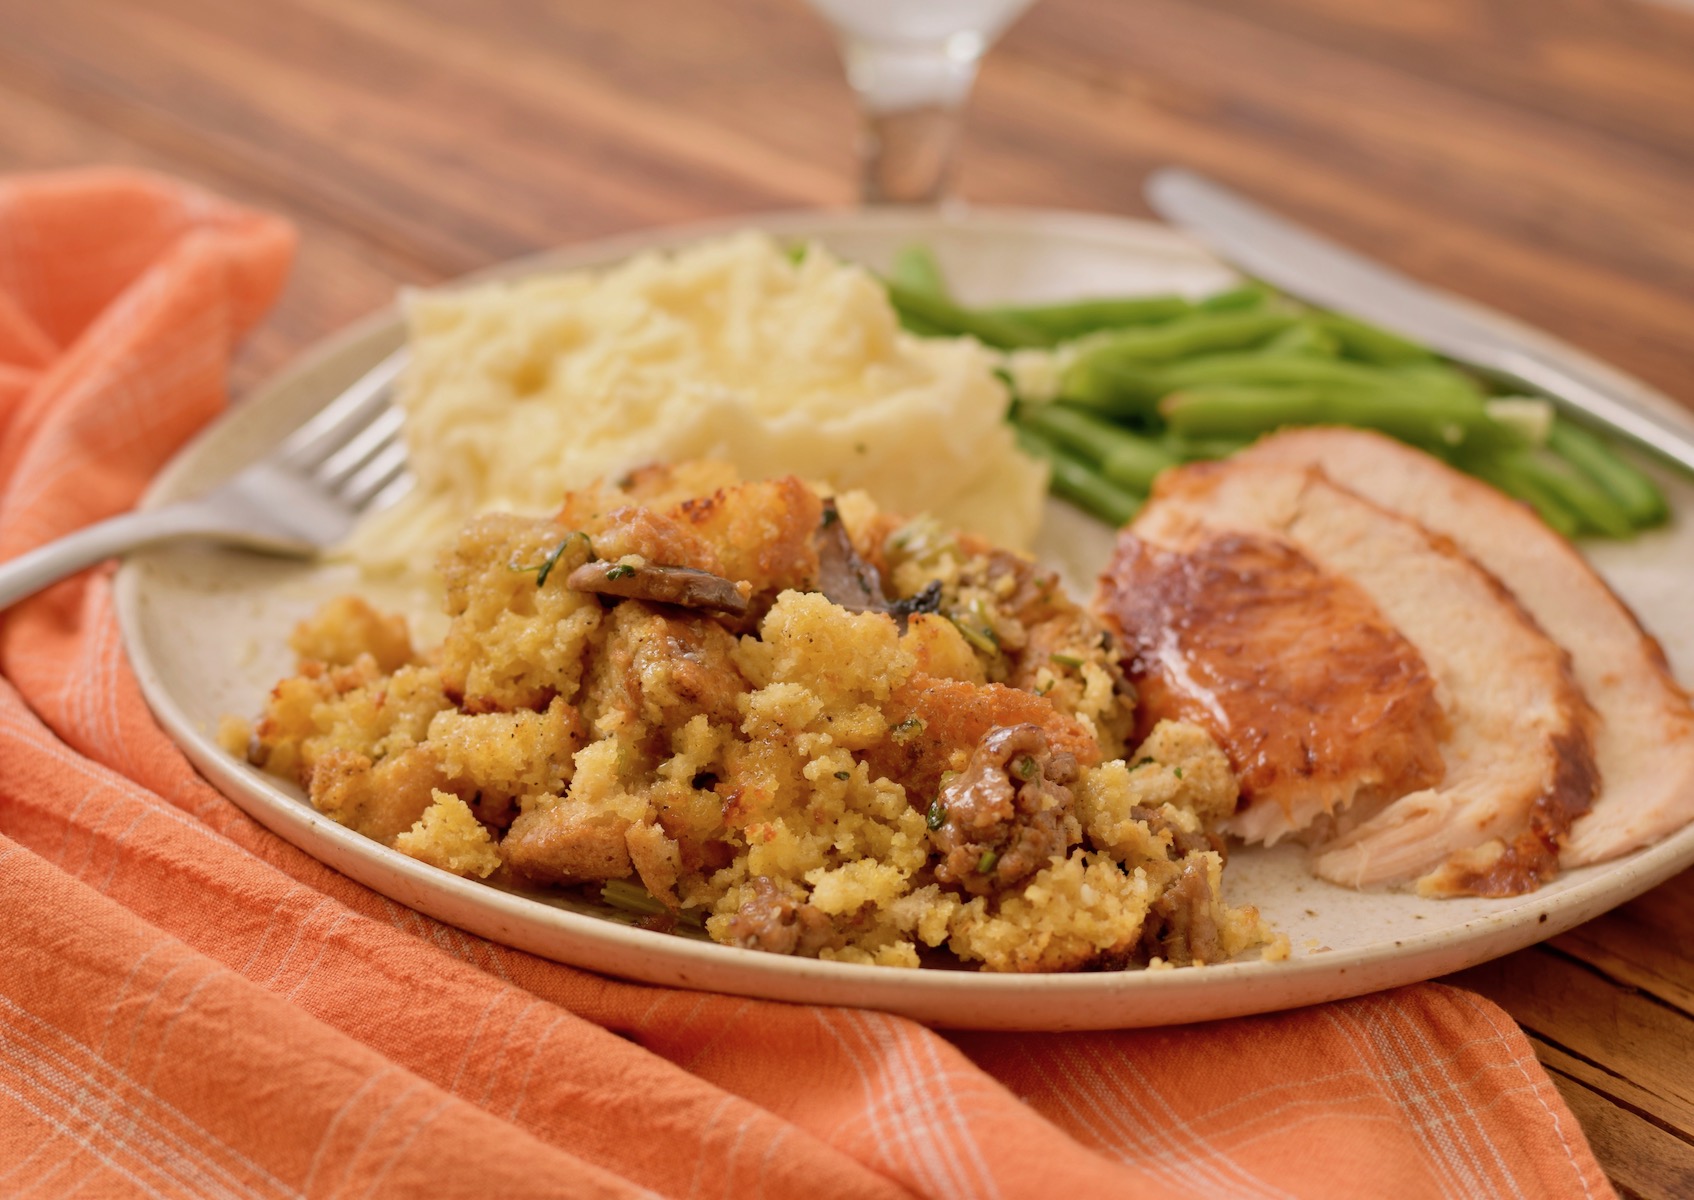 gluten free cornbread and sausage stuffing on dinner plate